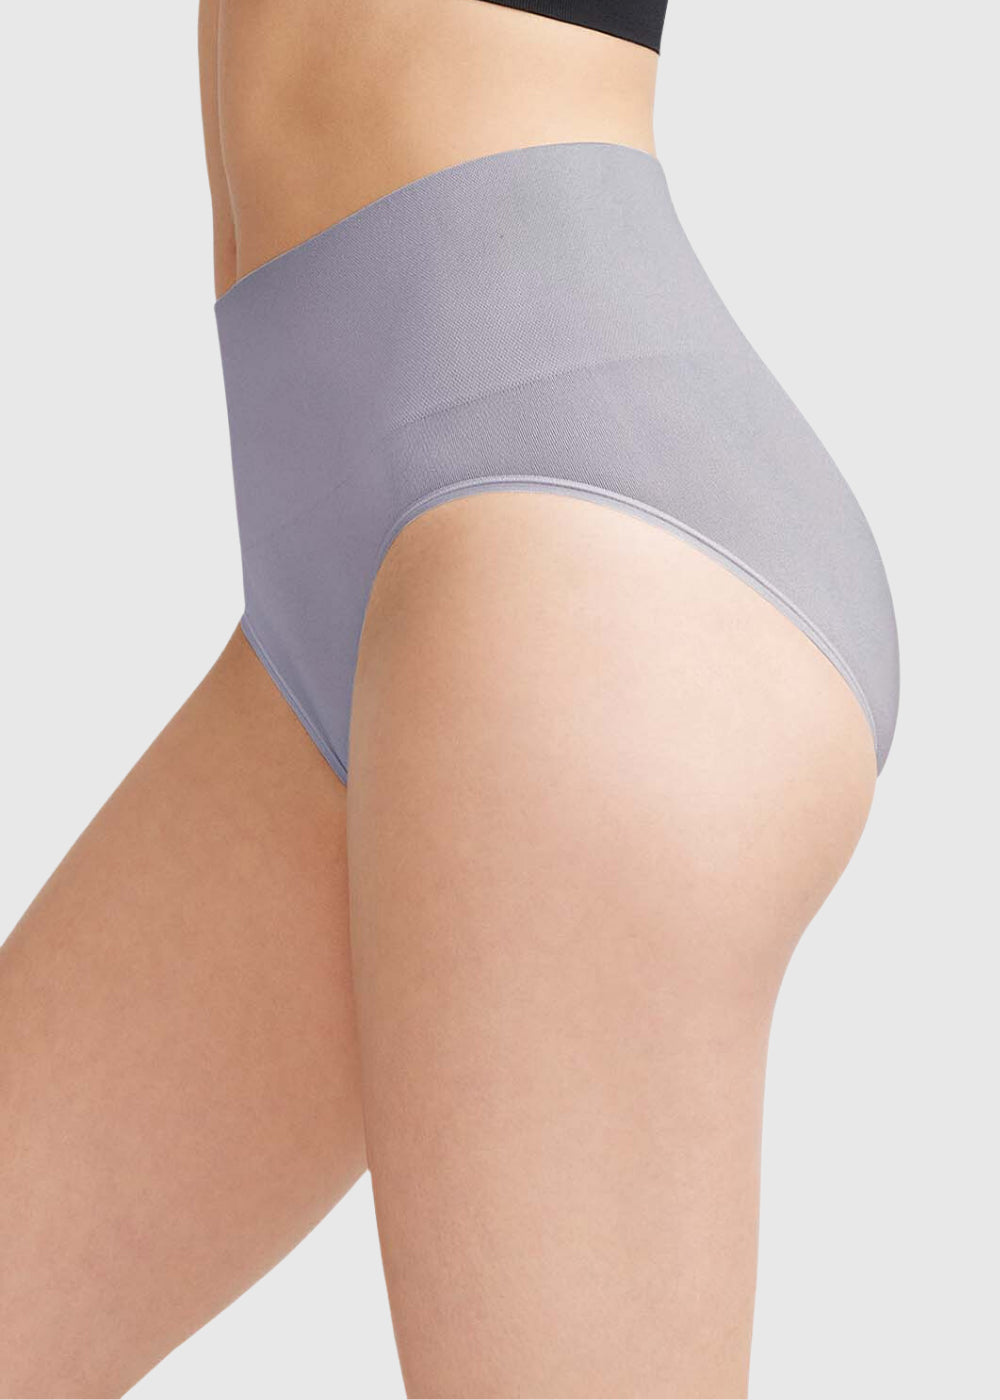 Sage Shaping Brief - Seamless from Yummie in Dapple Grey  - 1